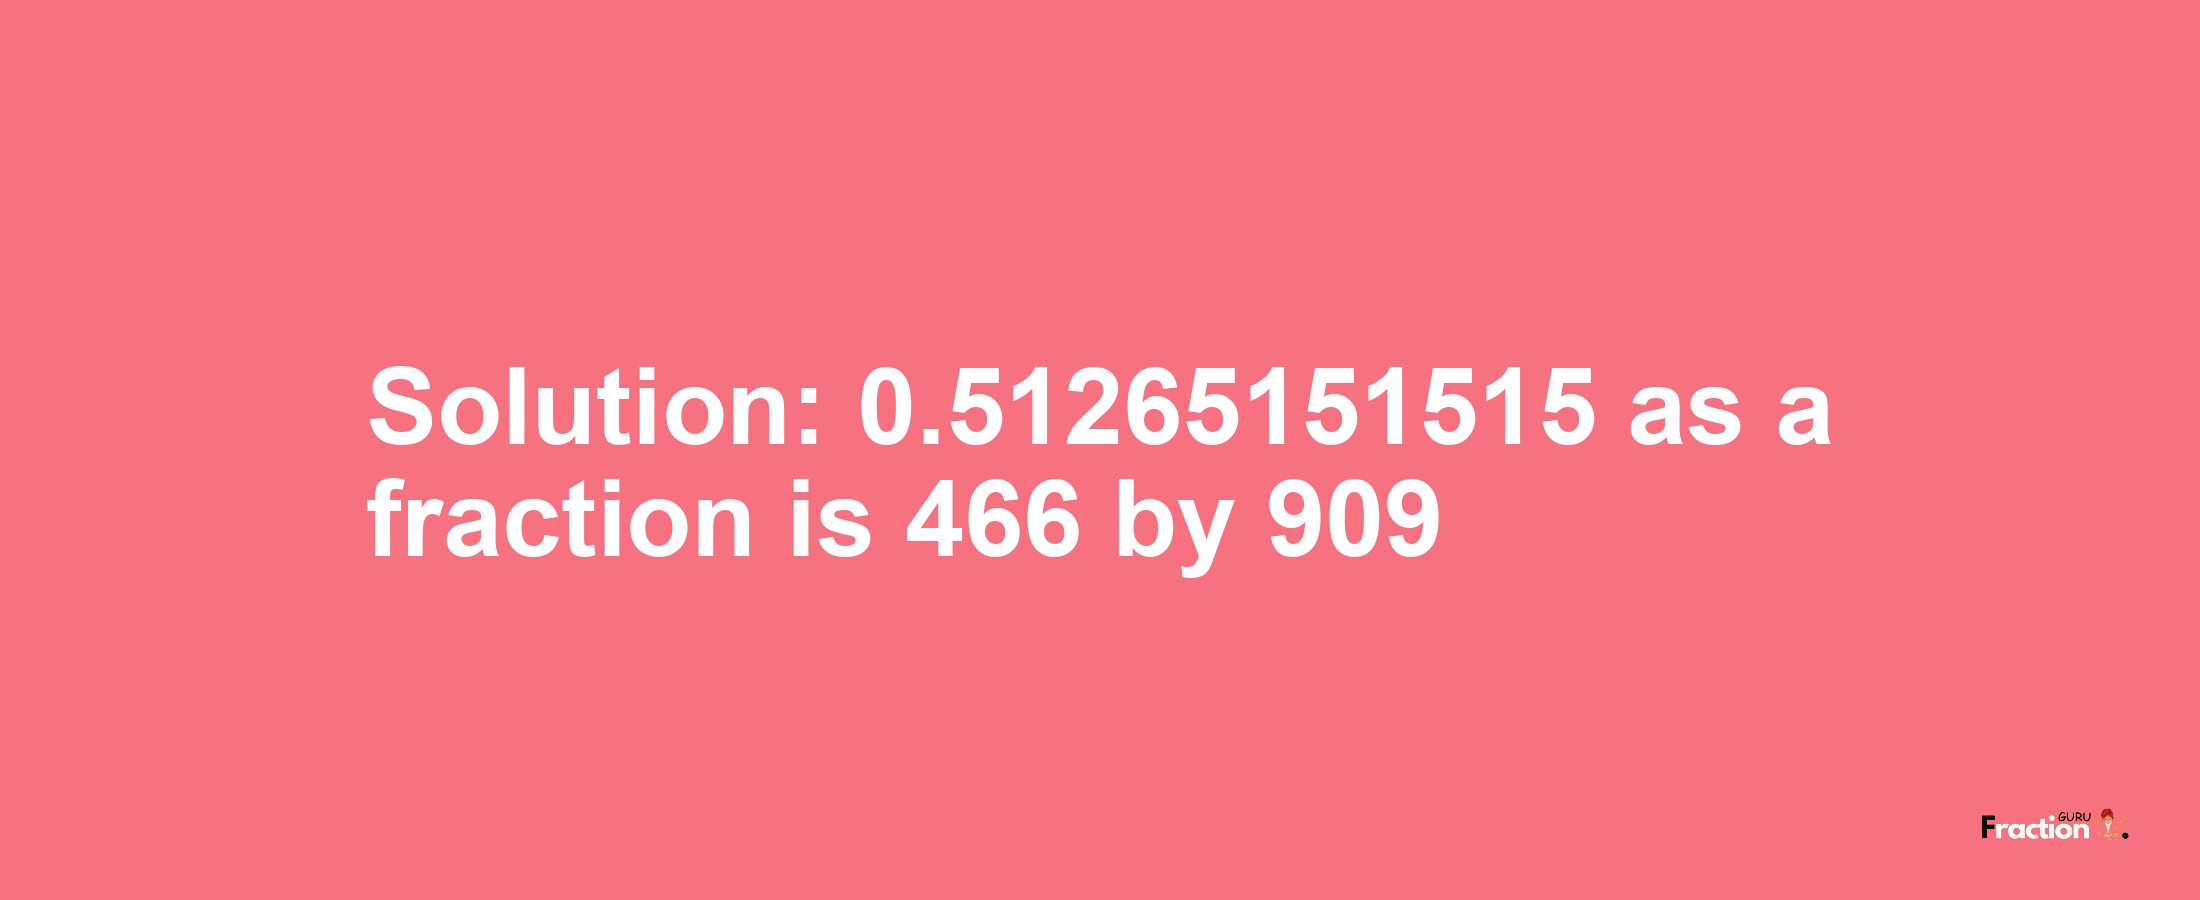 Solution:0.51265151515 as a fraction is 466/909